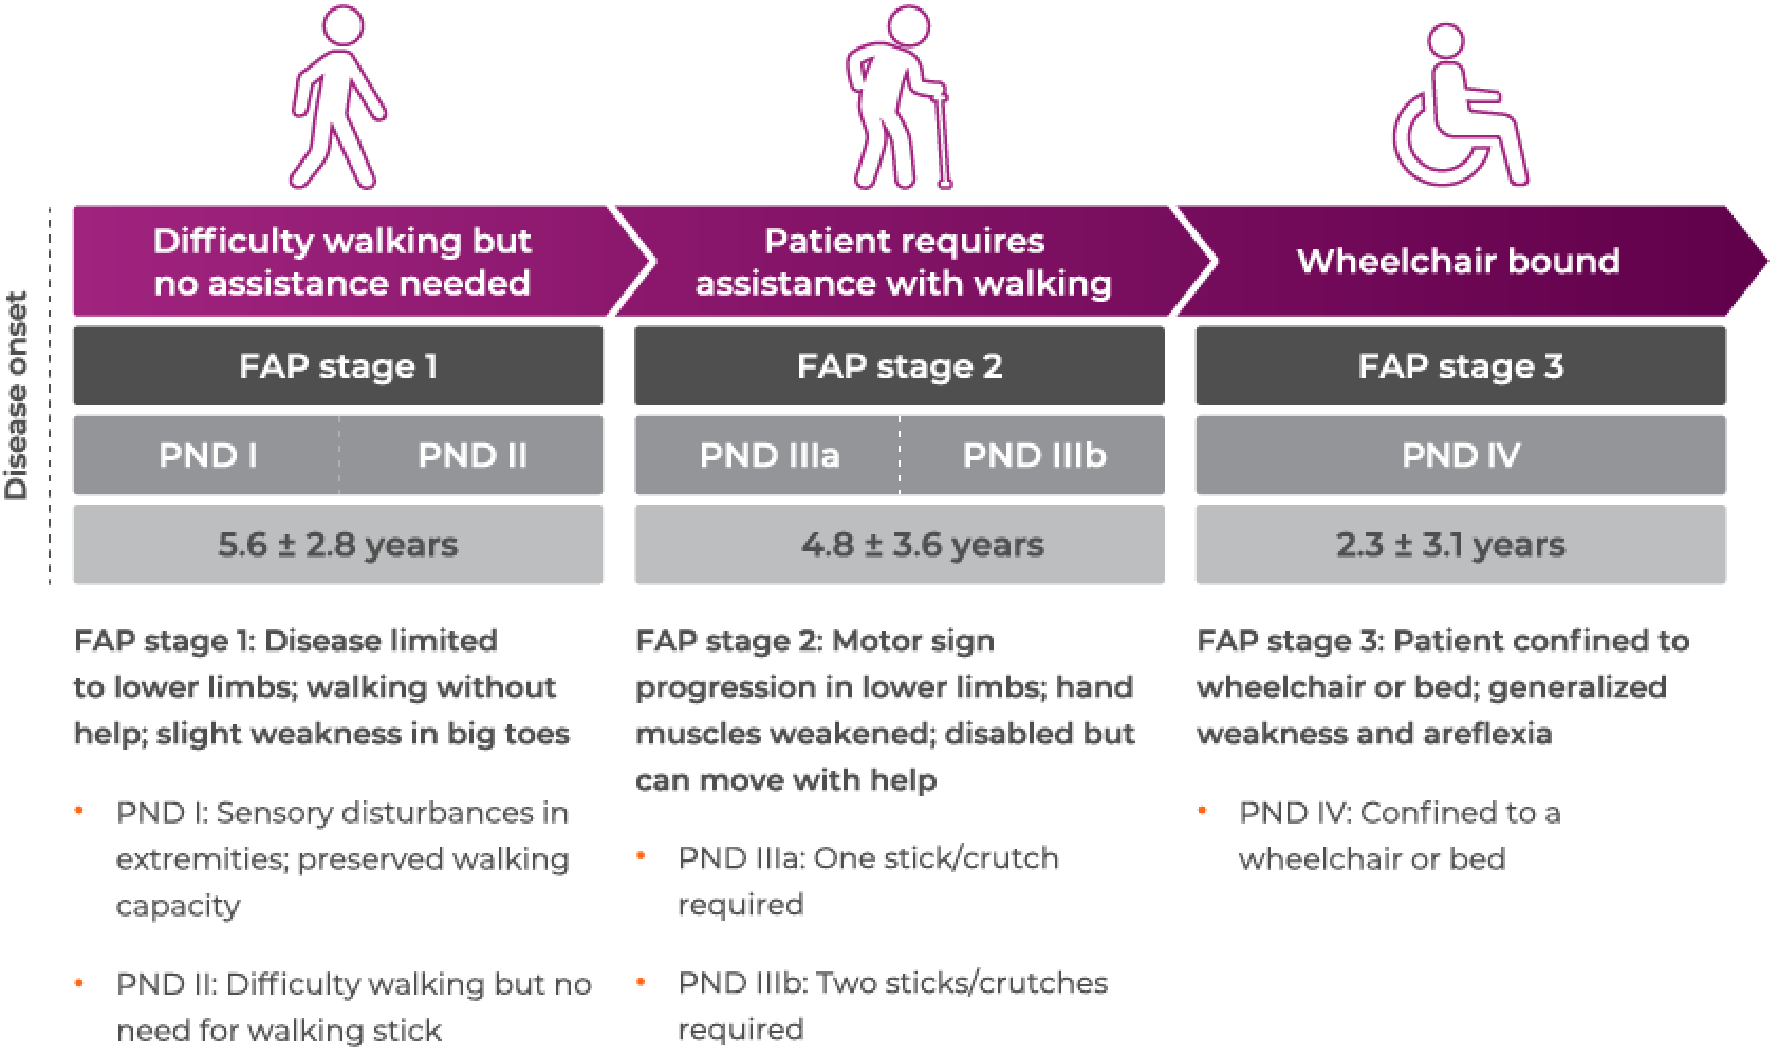 Diagram of hATTR amyloidosis progression by FAP stages